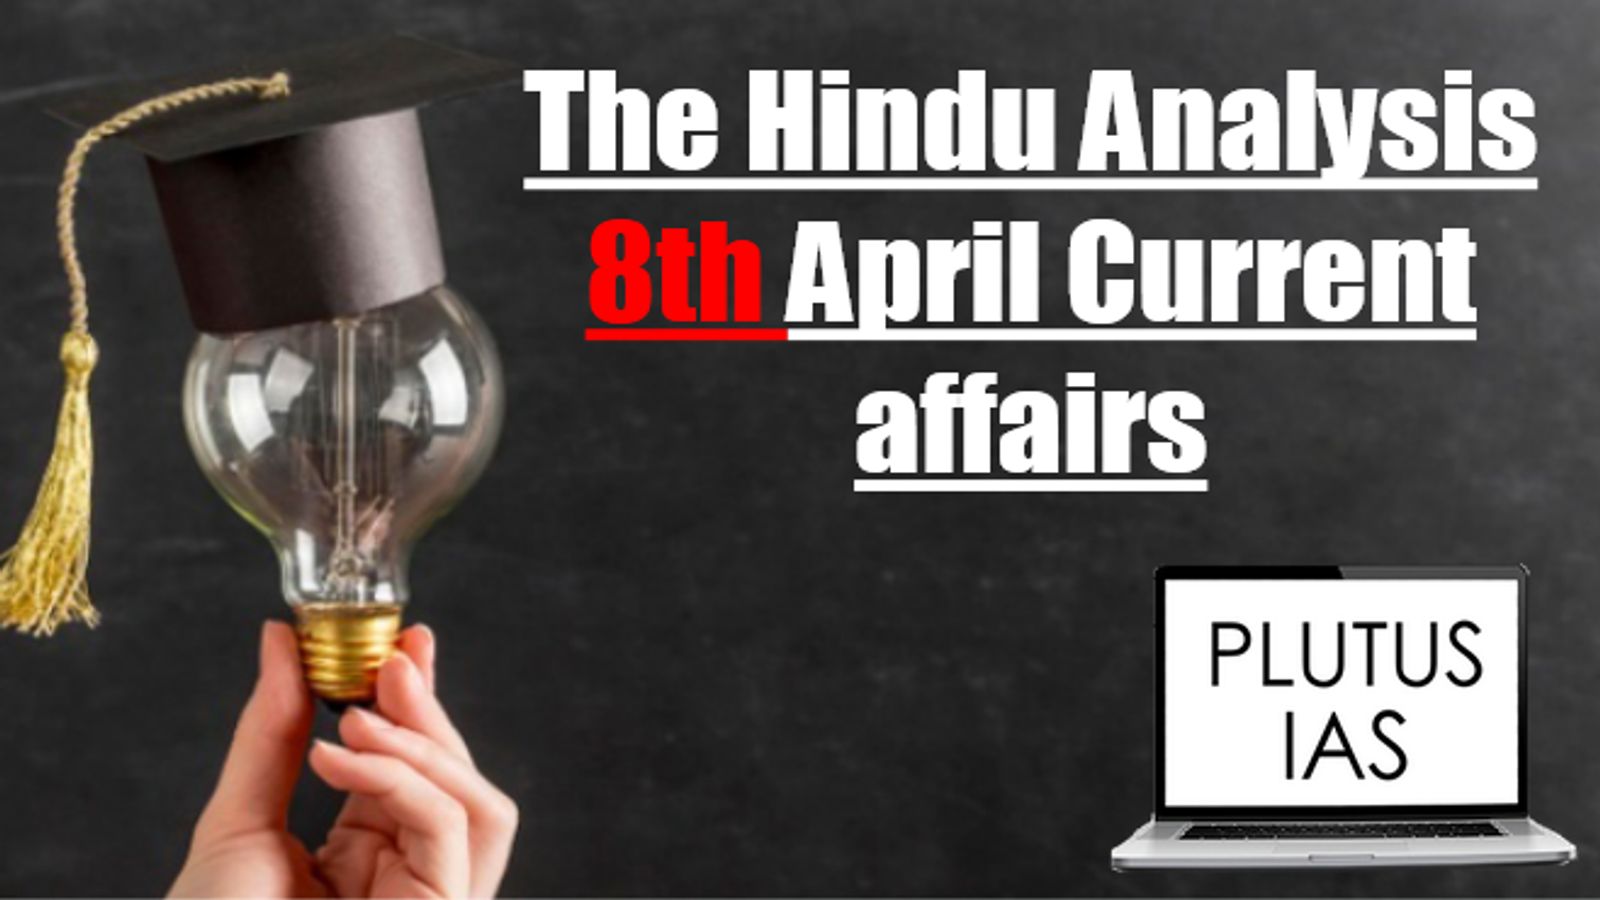 Today Current Affairs 8th April